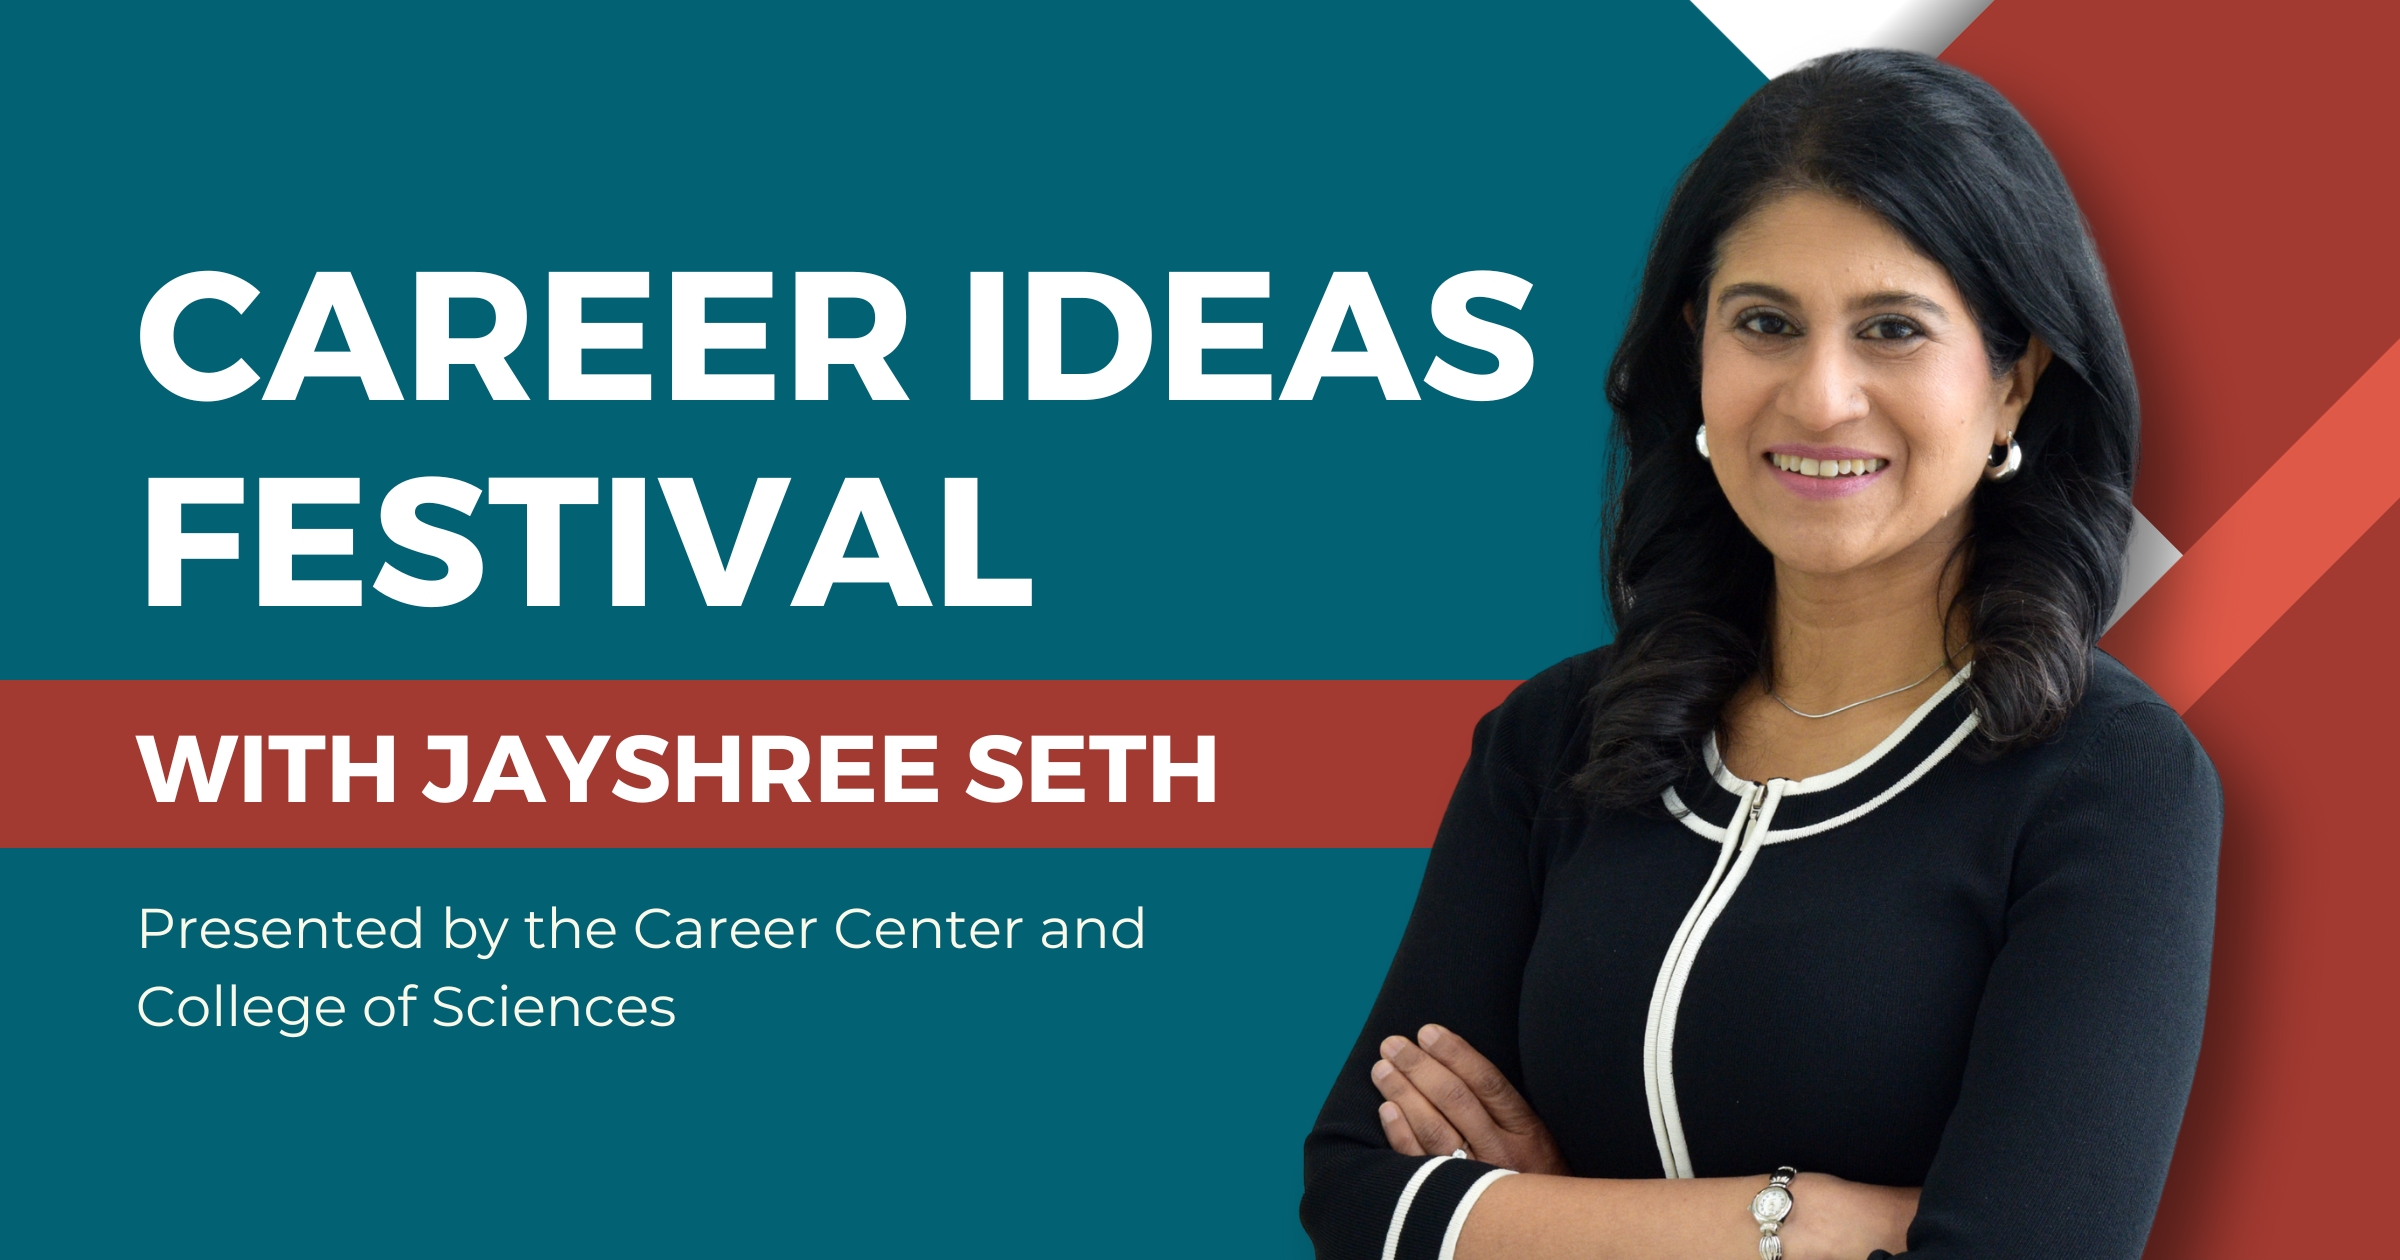 Career Ideas Festival with Jayshree Seth, presented by the Career Center and College of Sciences